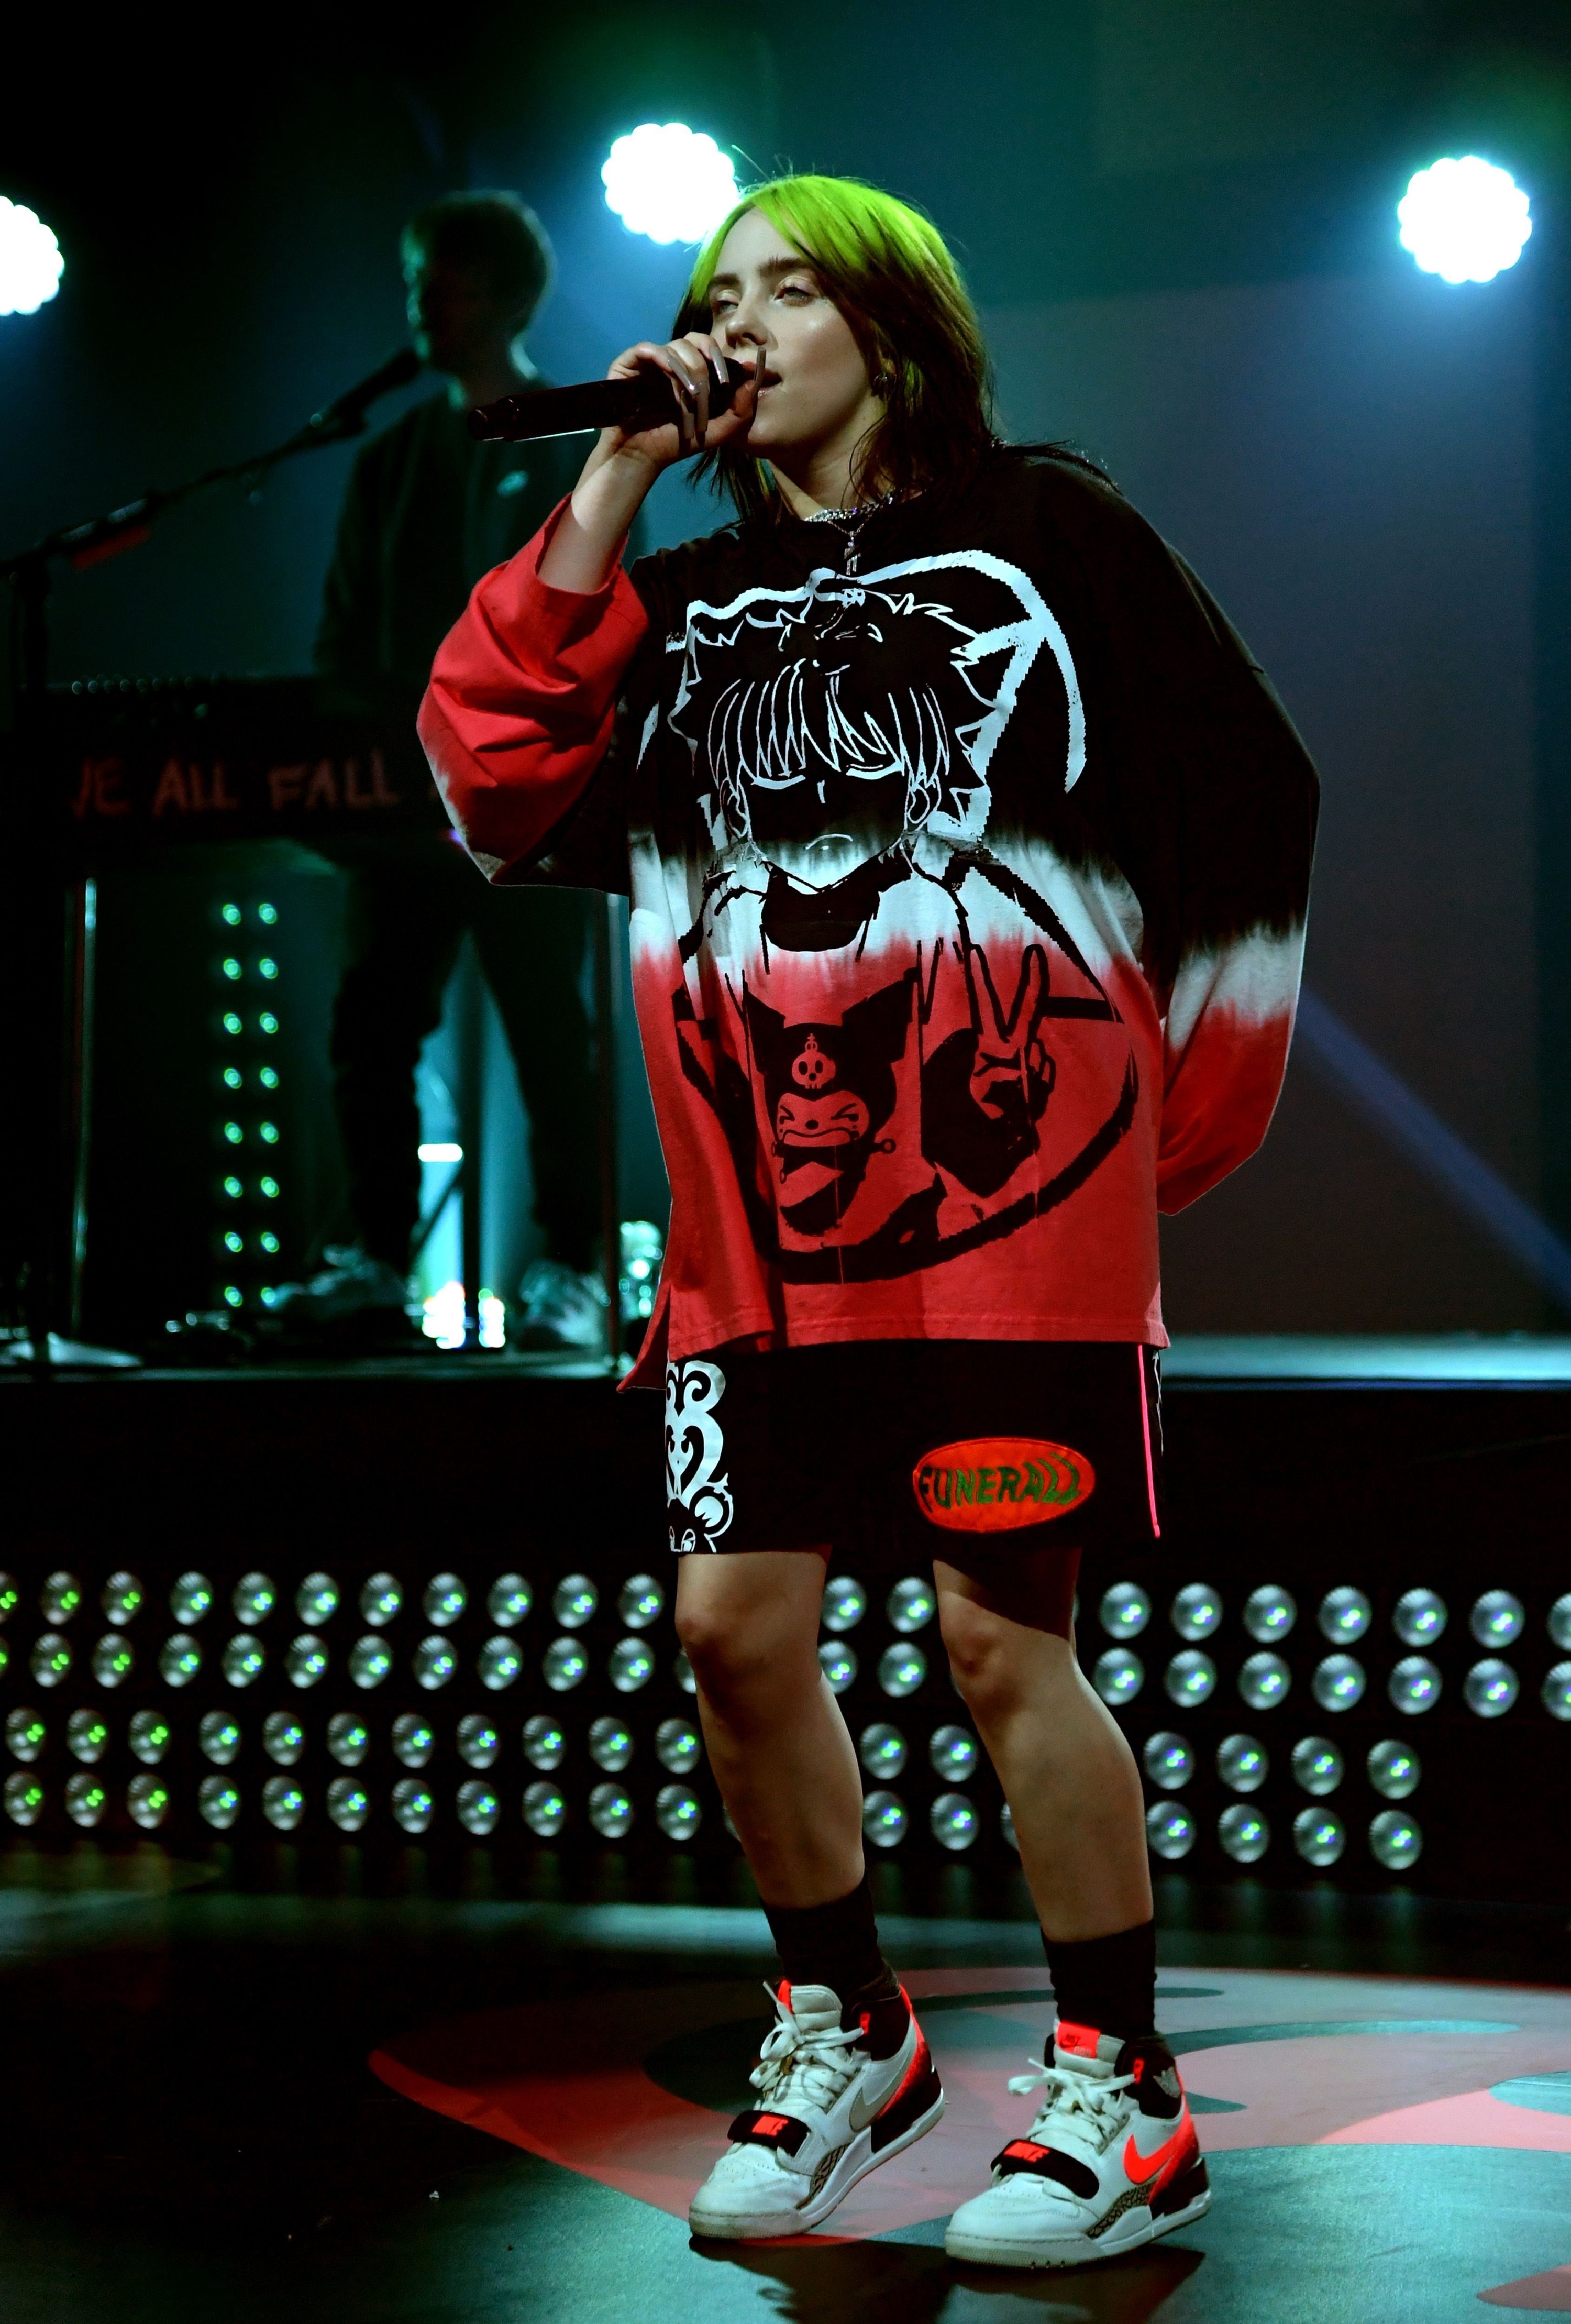 Billie performing in sneakers, shorts, and loose-fitting, long-sleeved top